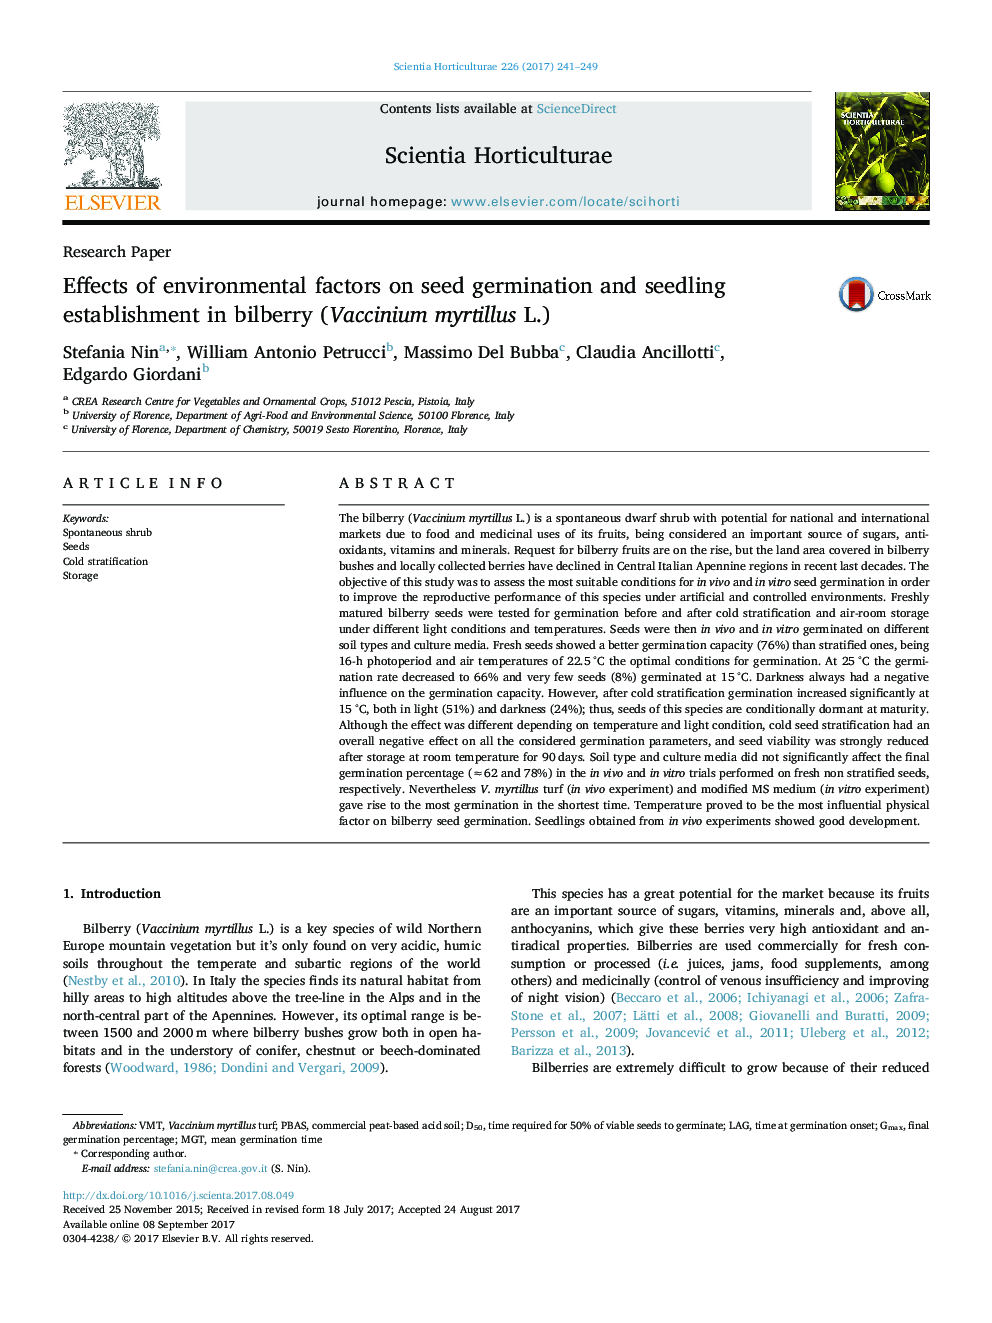 Research PaperEffects of environmental factors on seed germination and seedling establishment in bilberry (Vaccinium myrtillus L.)